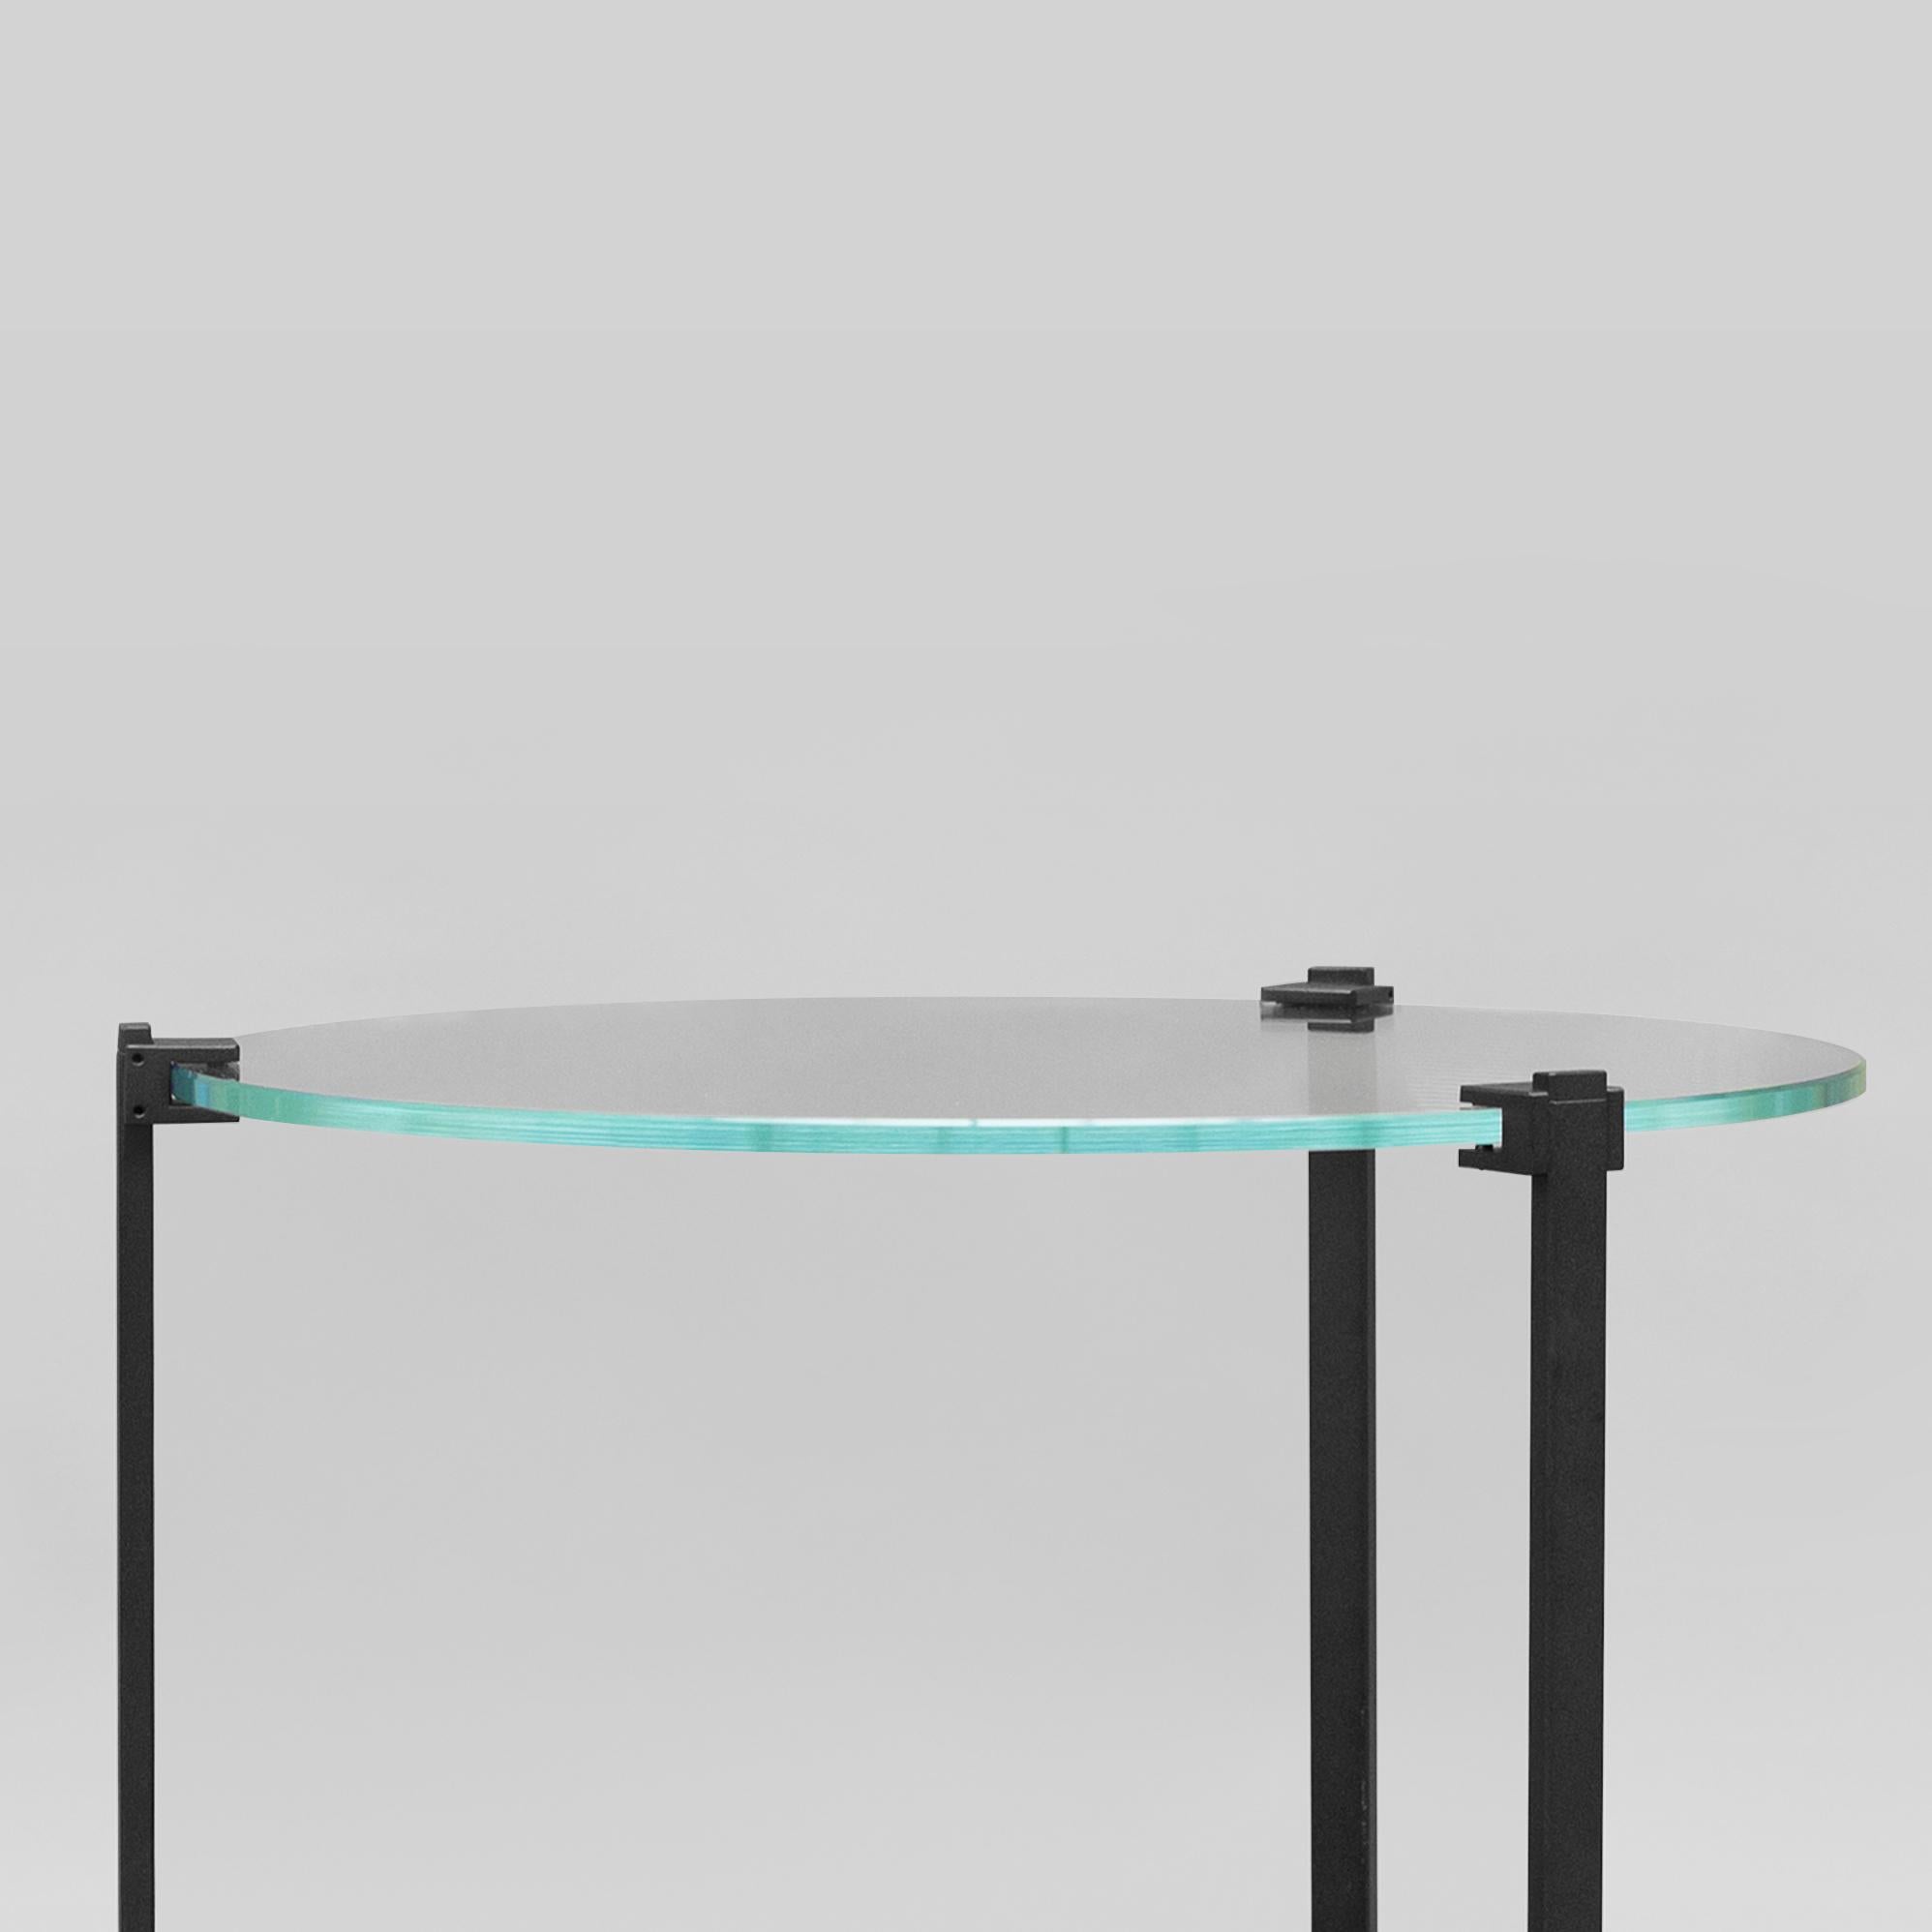 Contemporary Sidetable designed by Peter Ghyczy.
Manufactured by Ghyczy (Netherlands)

The T79 is versatile as it is modest. Three stainless steel legs are secured to the glass top by cast metal details. To be ordered in different heights and